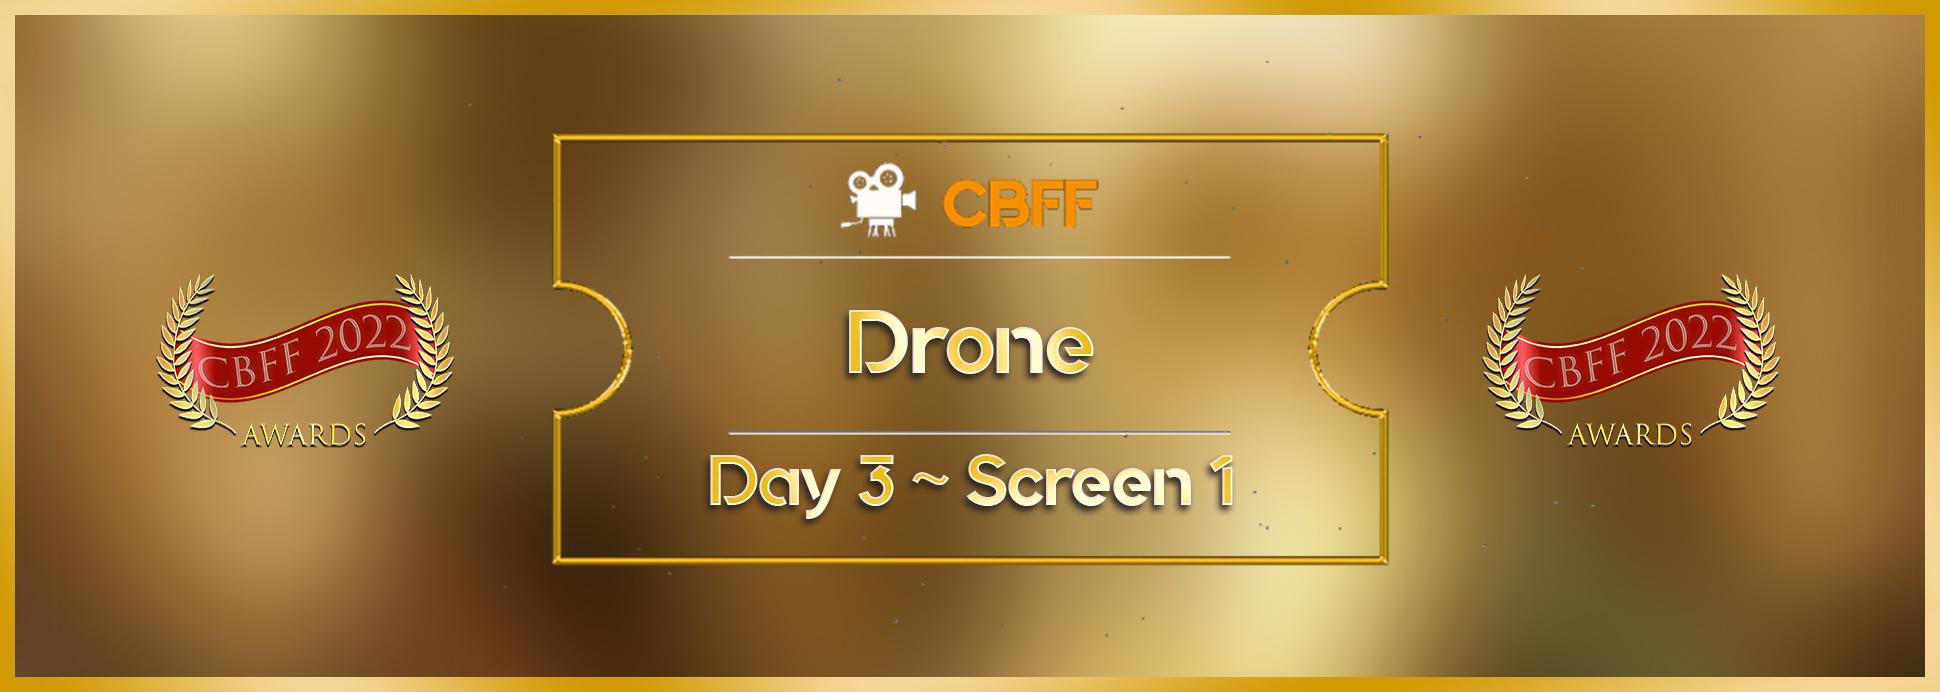 Day 3 Screen 1 Drone